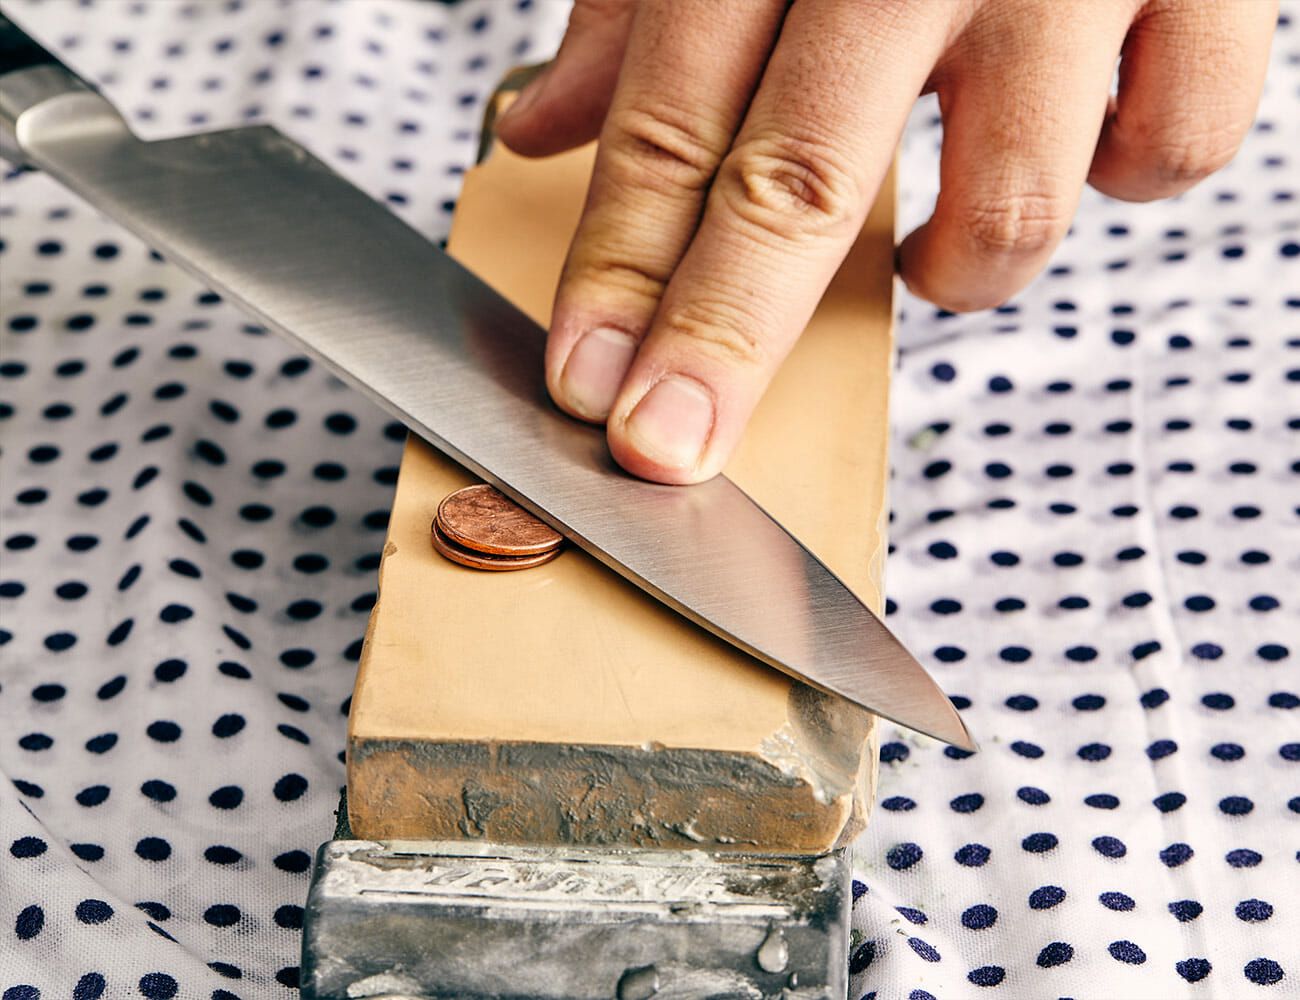 How to Sharpen Your Kitchen Knives at Home